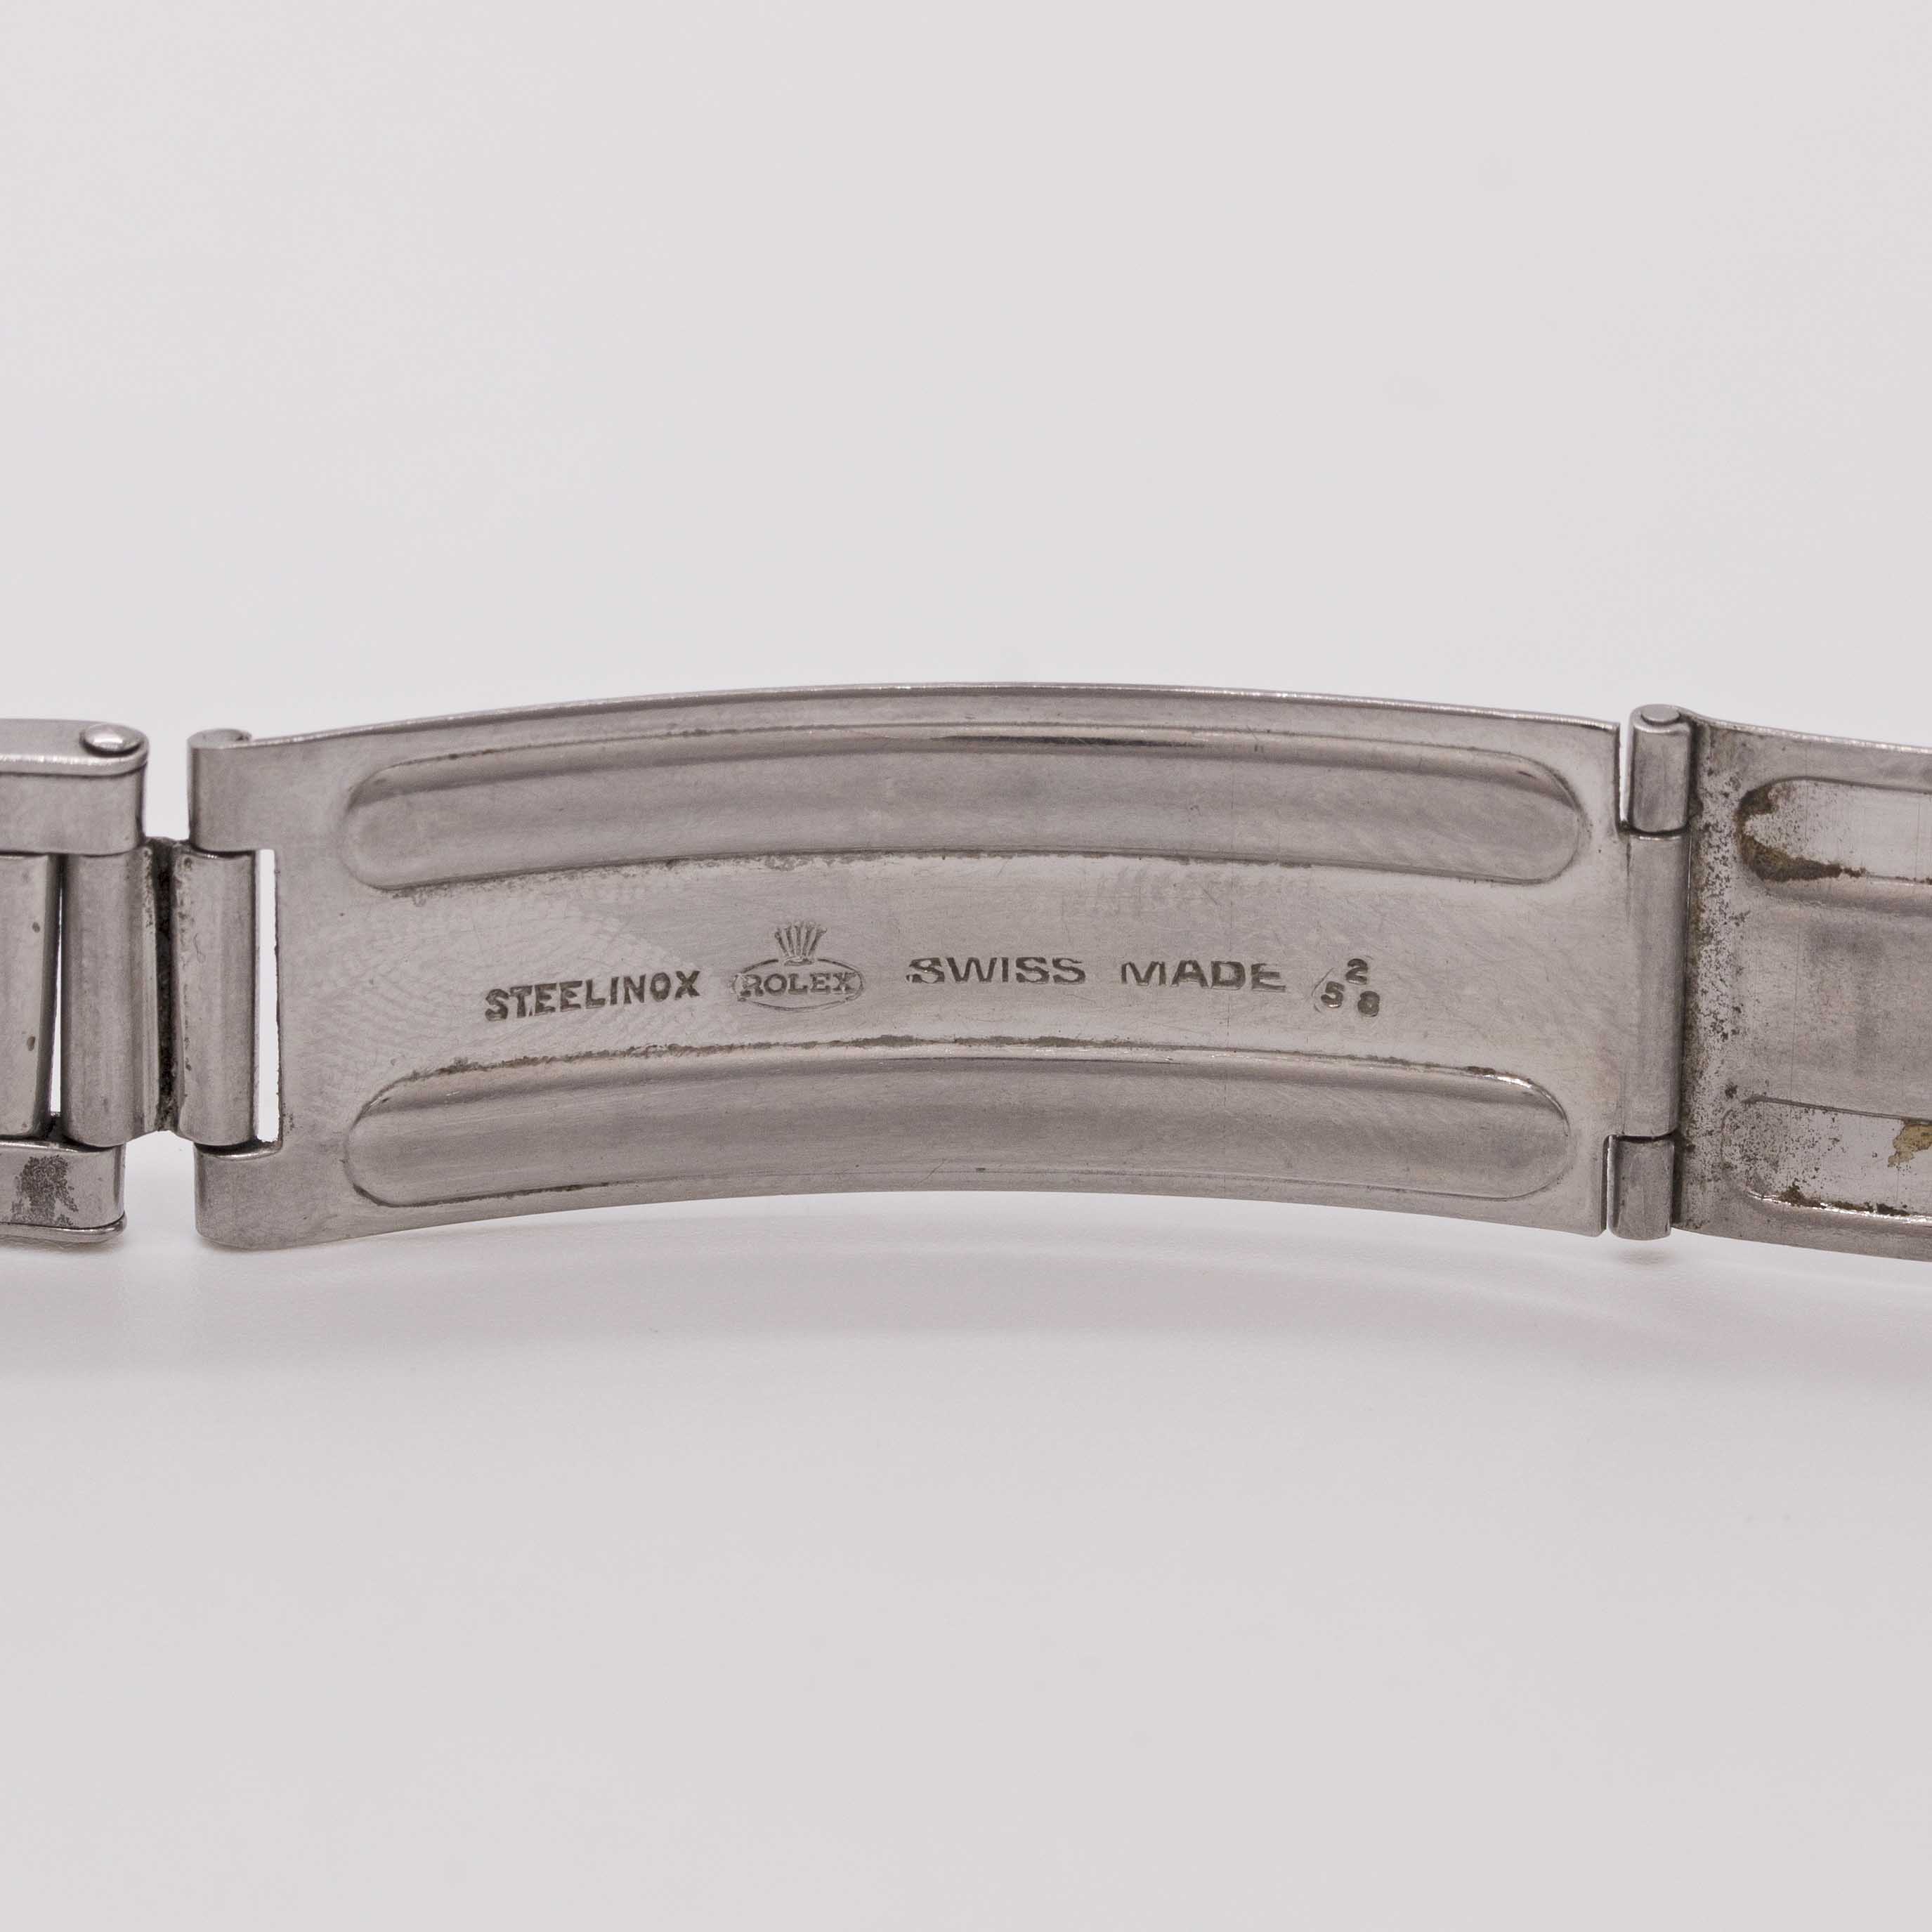 A RARE GENTLEMAN'S STAINLESS STEEL ROLEX "UFO" PRECISION BRACELET WATCH CIRCA 1958, REF. 9083 WITH - Image 12 of 12